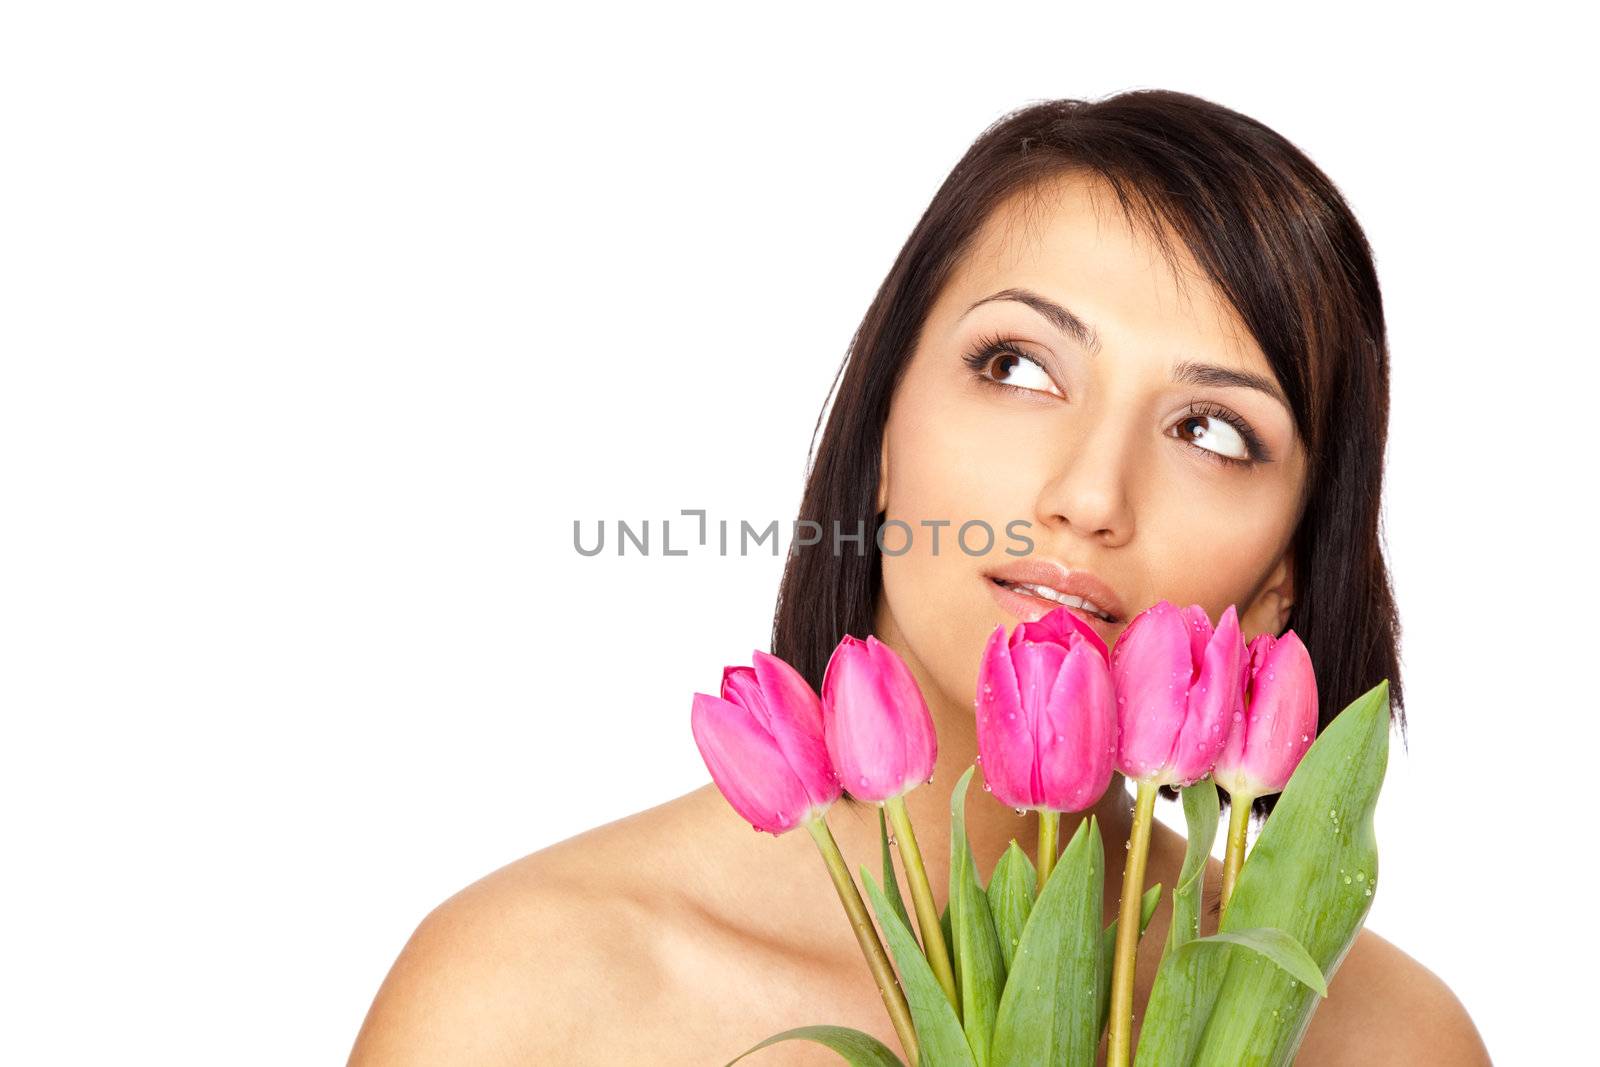 Beautiful naked shouders female holding a bunch of pink tulips isolated on white